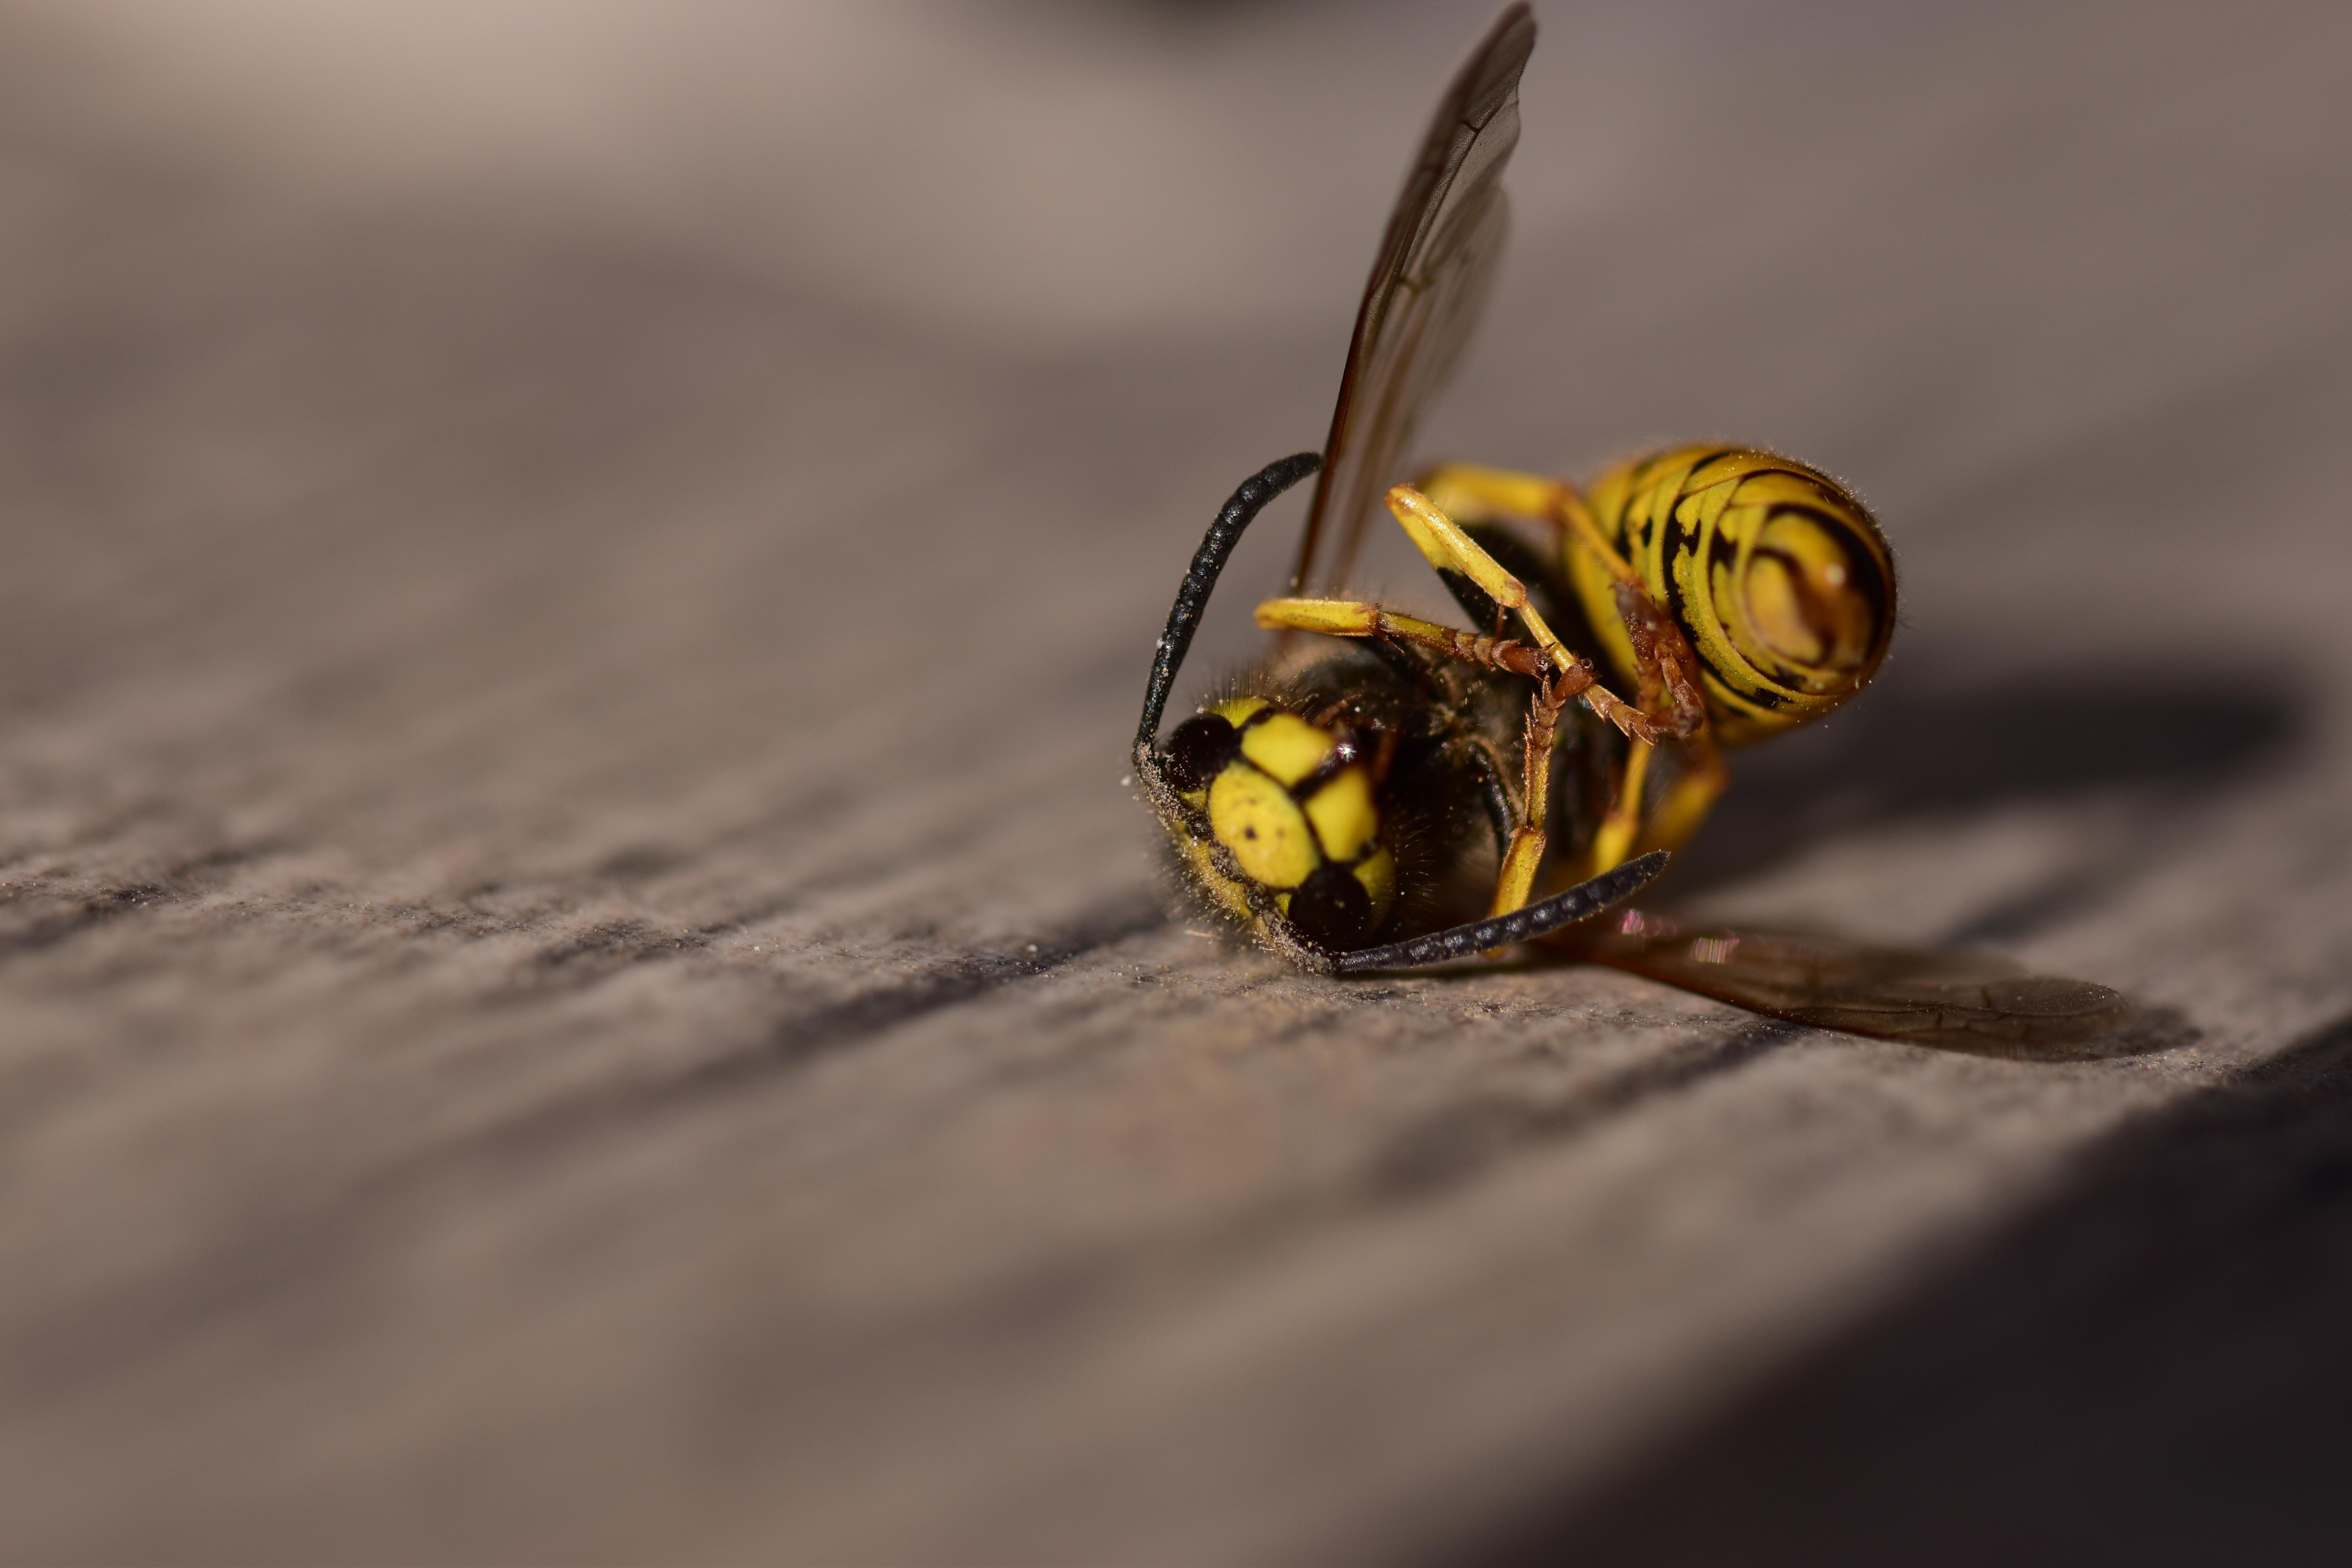 Close-up of a yellow and black wasp on a wooden surface